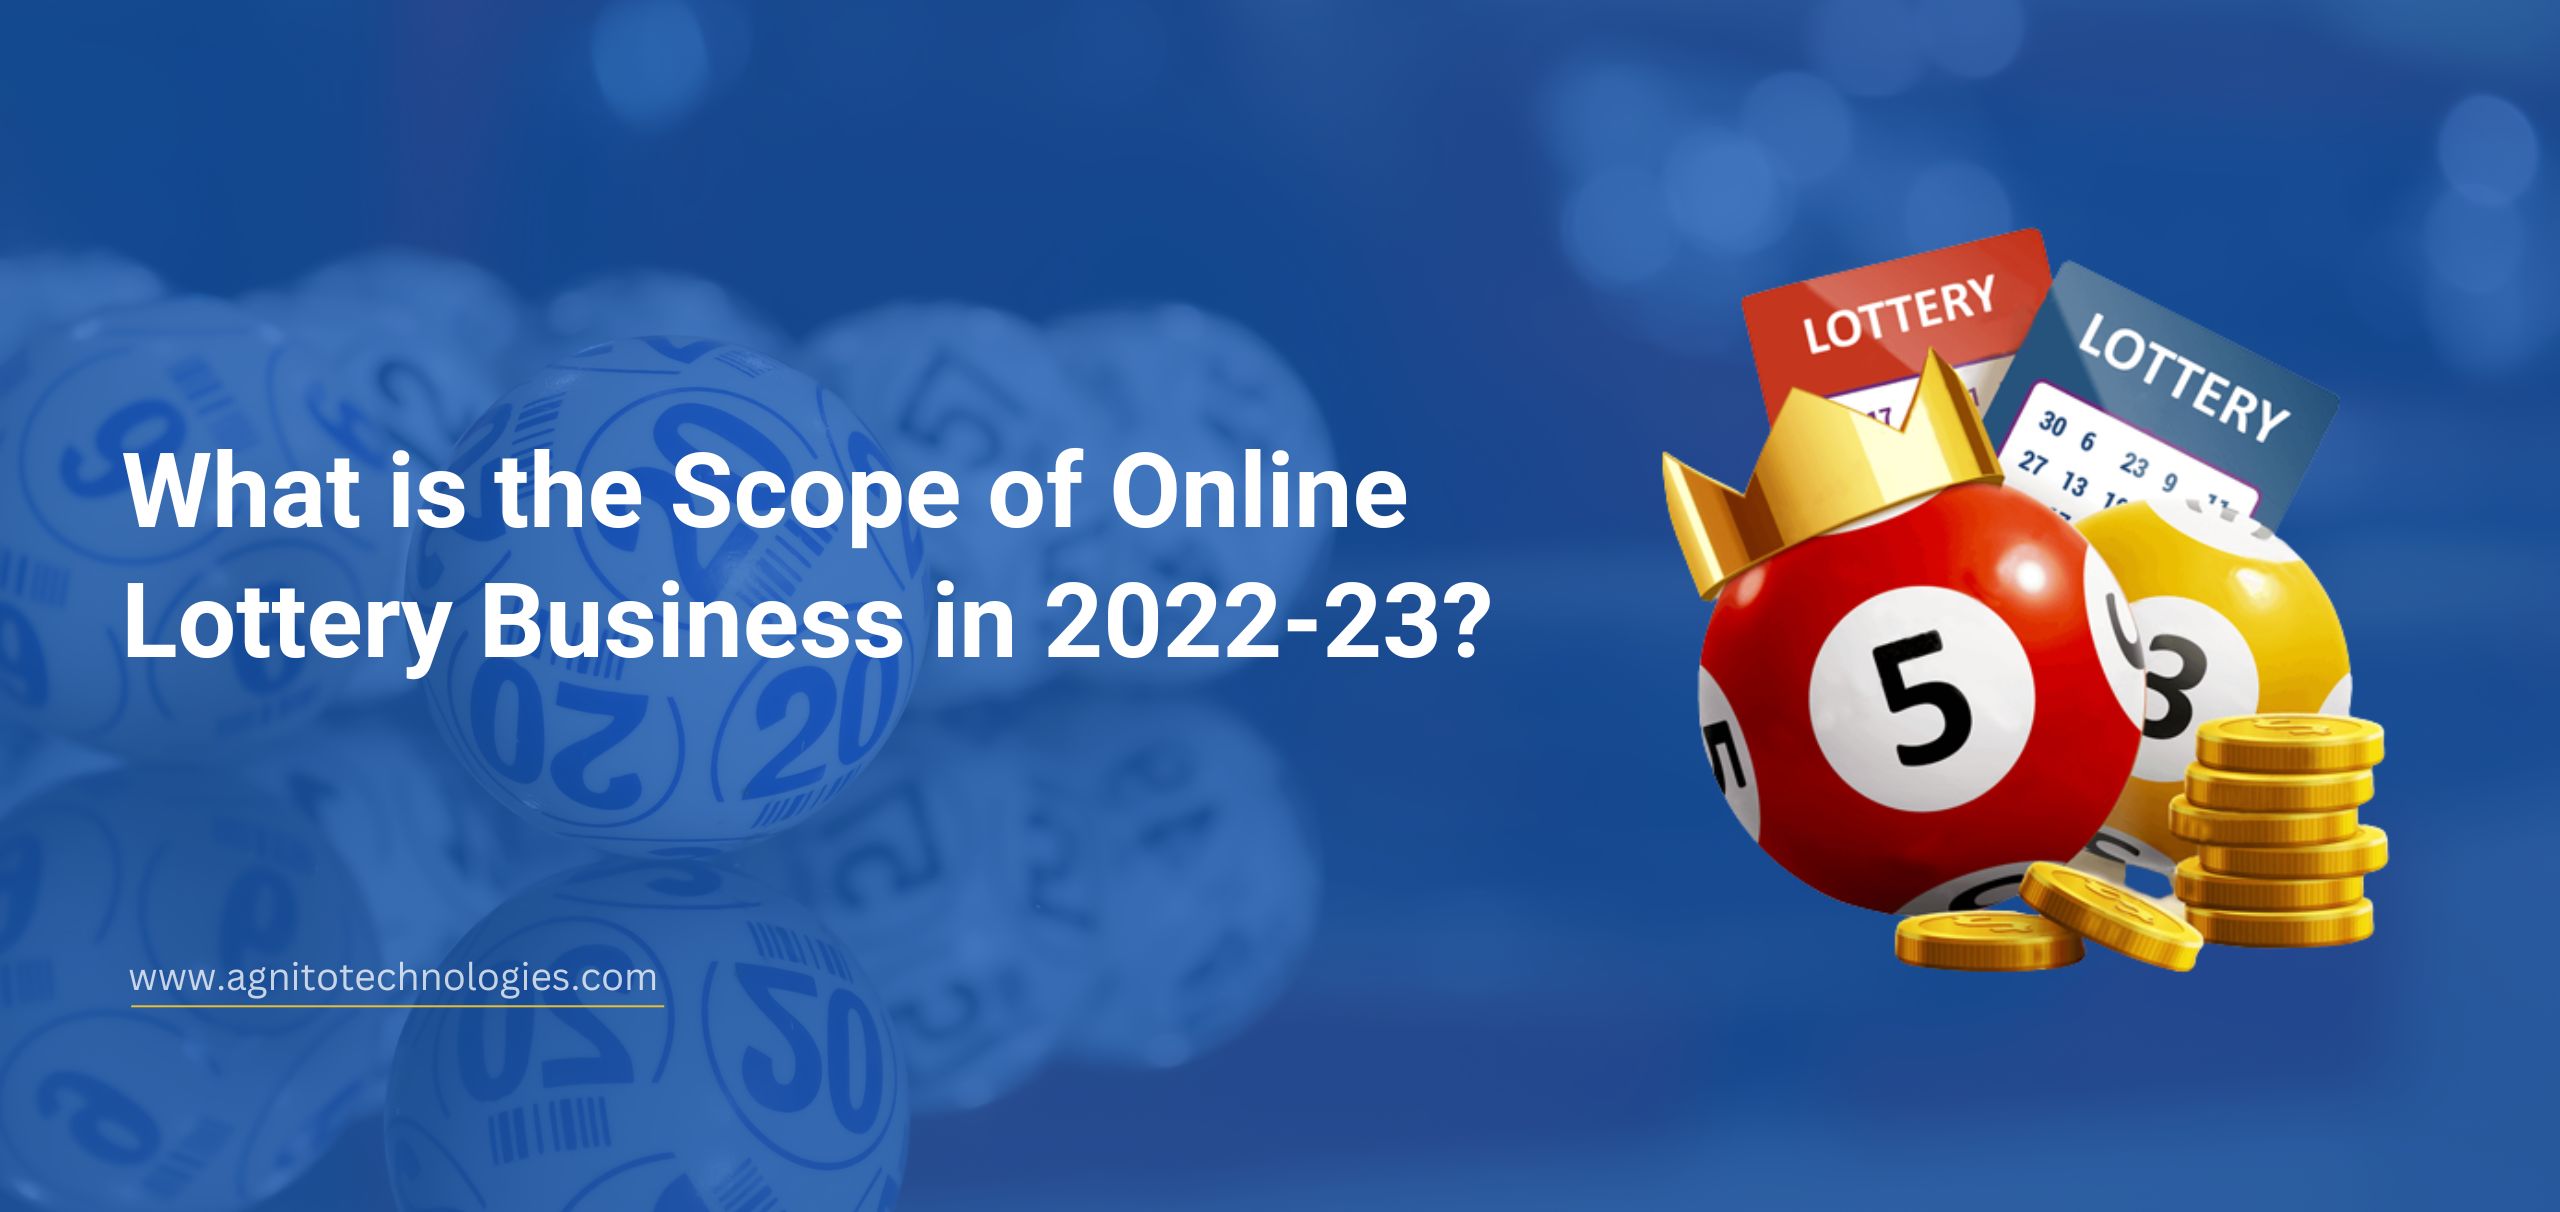 What is the Scope of Online Lottery Business in 2022-23